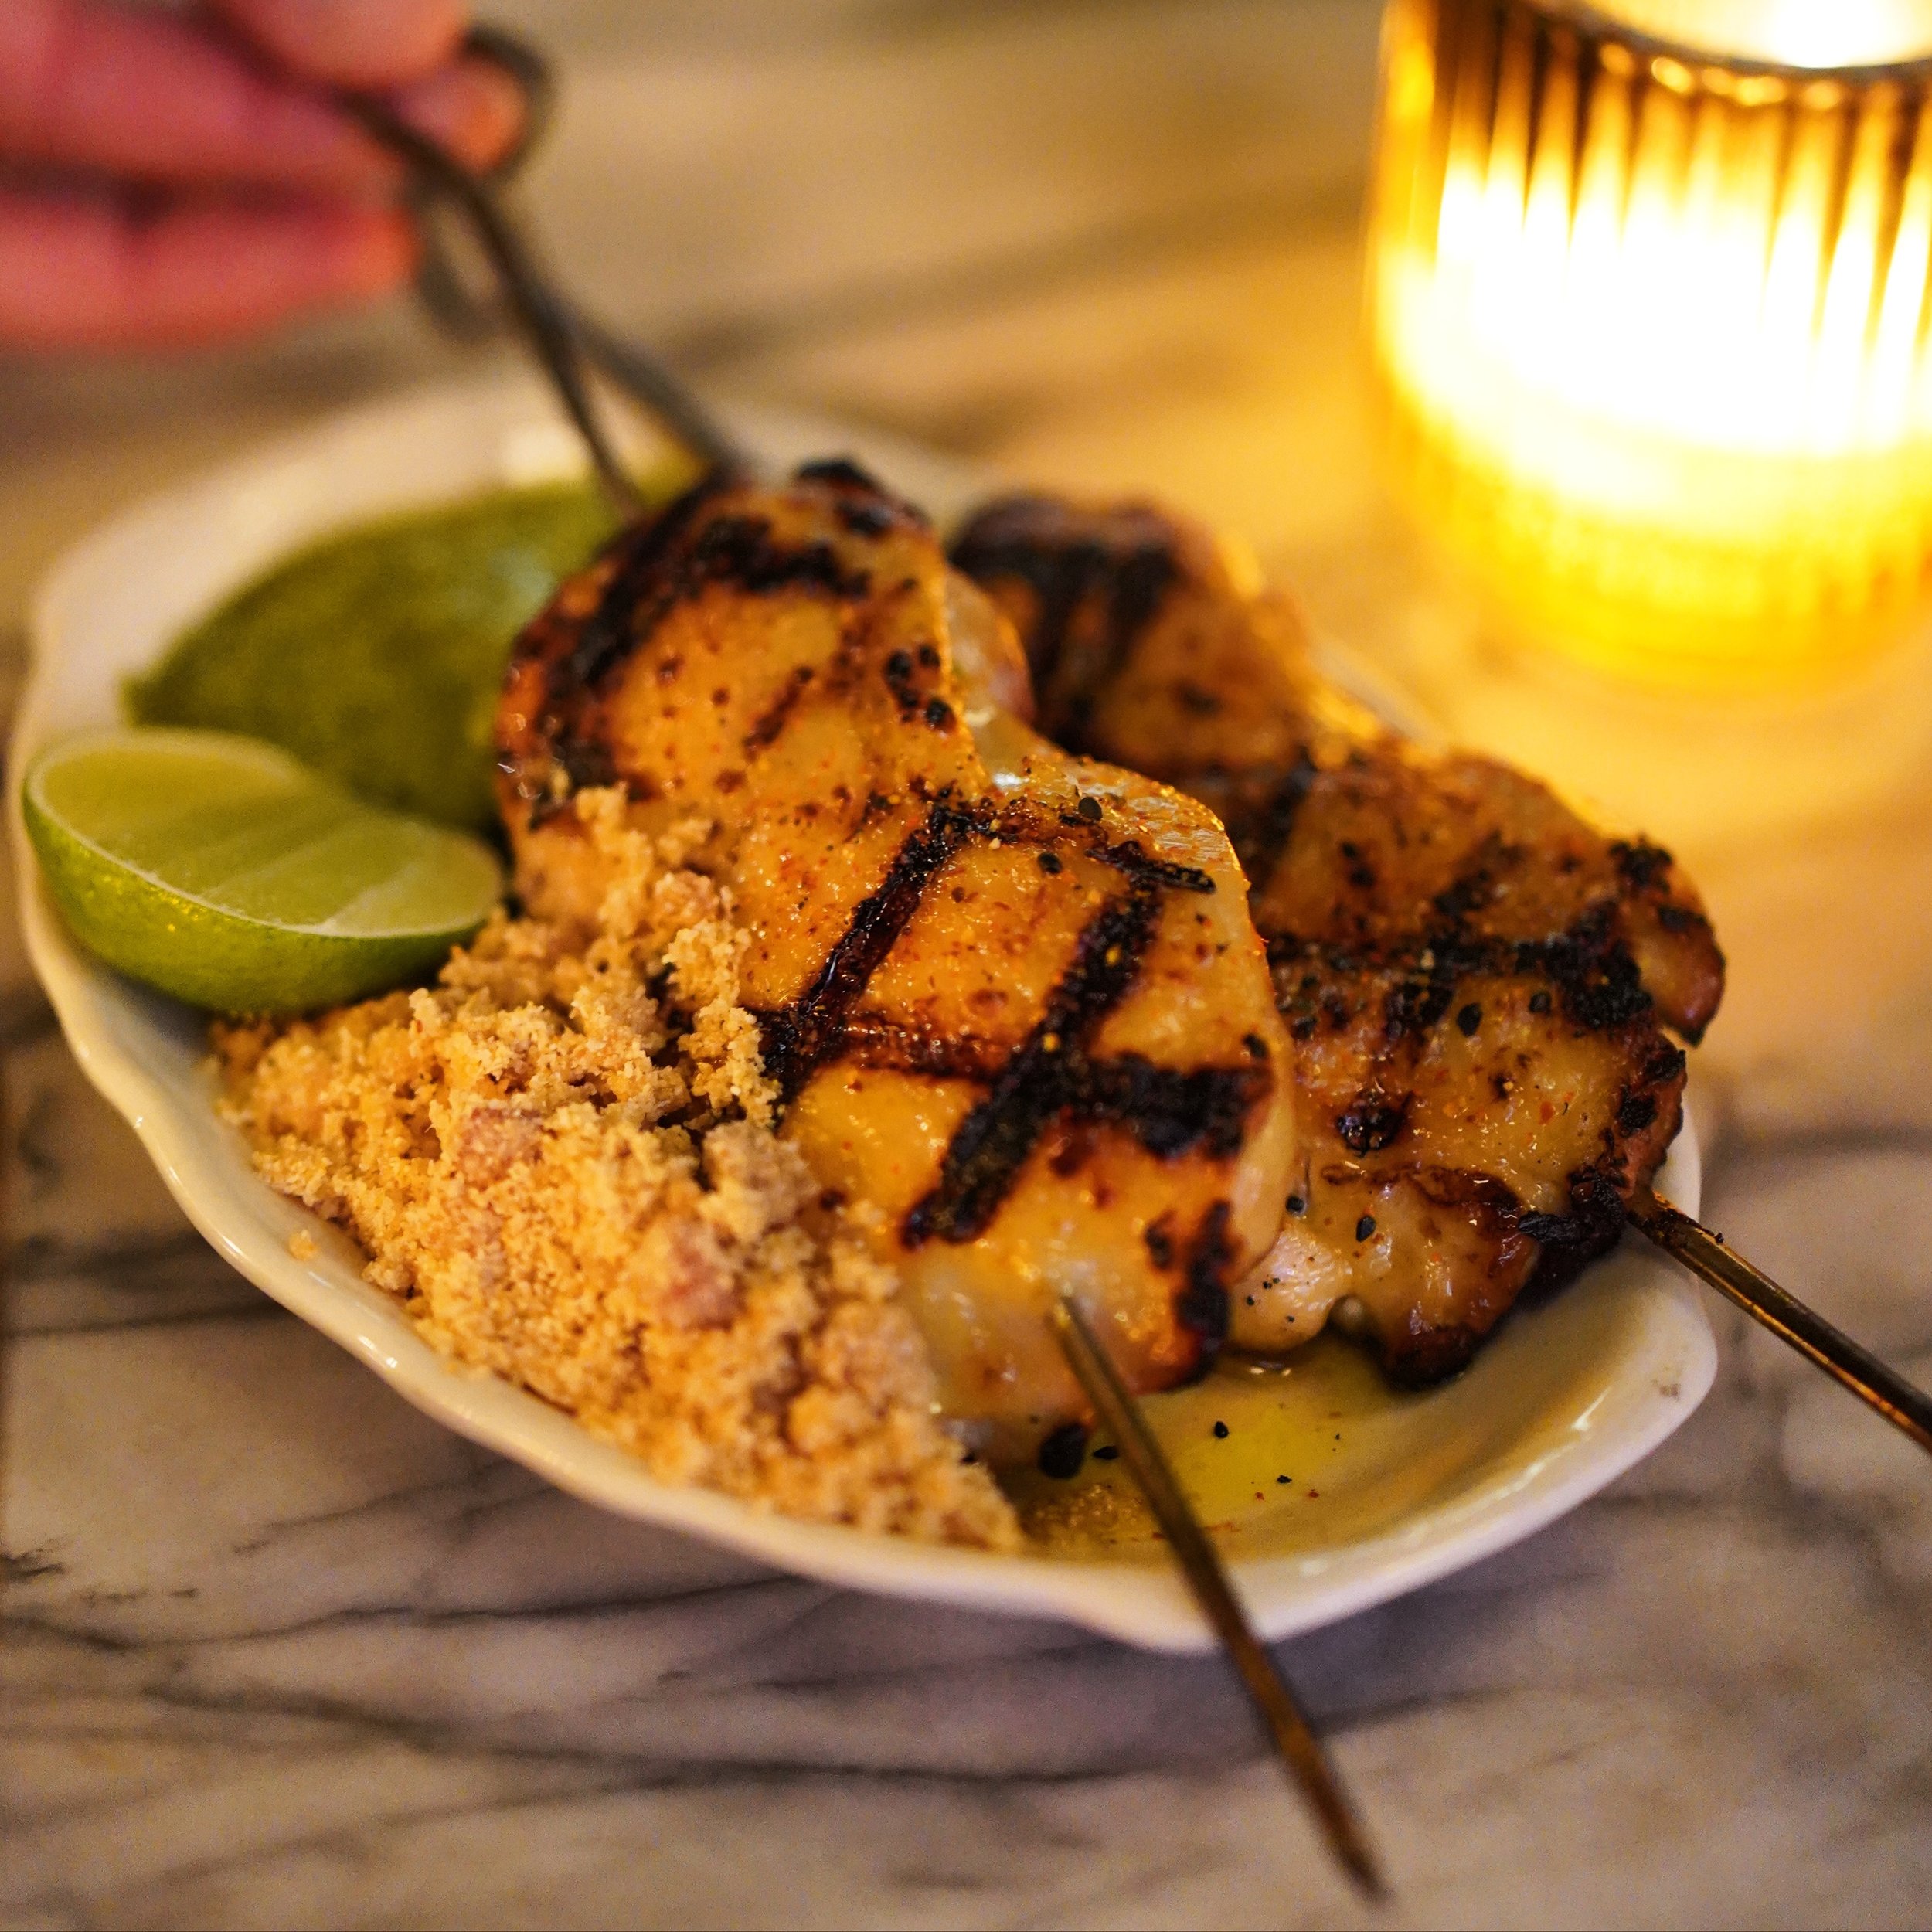 Crispy Chicken Thigh Xixo 😋 They&rsquo;re served with Togarashi + Chimichurri + Farofa and are one of our many xixo/skewer options at Nossa Caipirinha Bar 😎🇧🇷🍽️ Come see for yourself! Open tonight 4pm-12am🤍